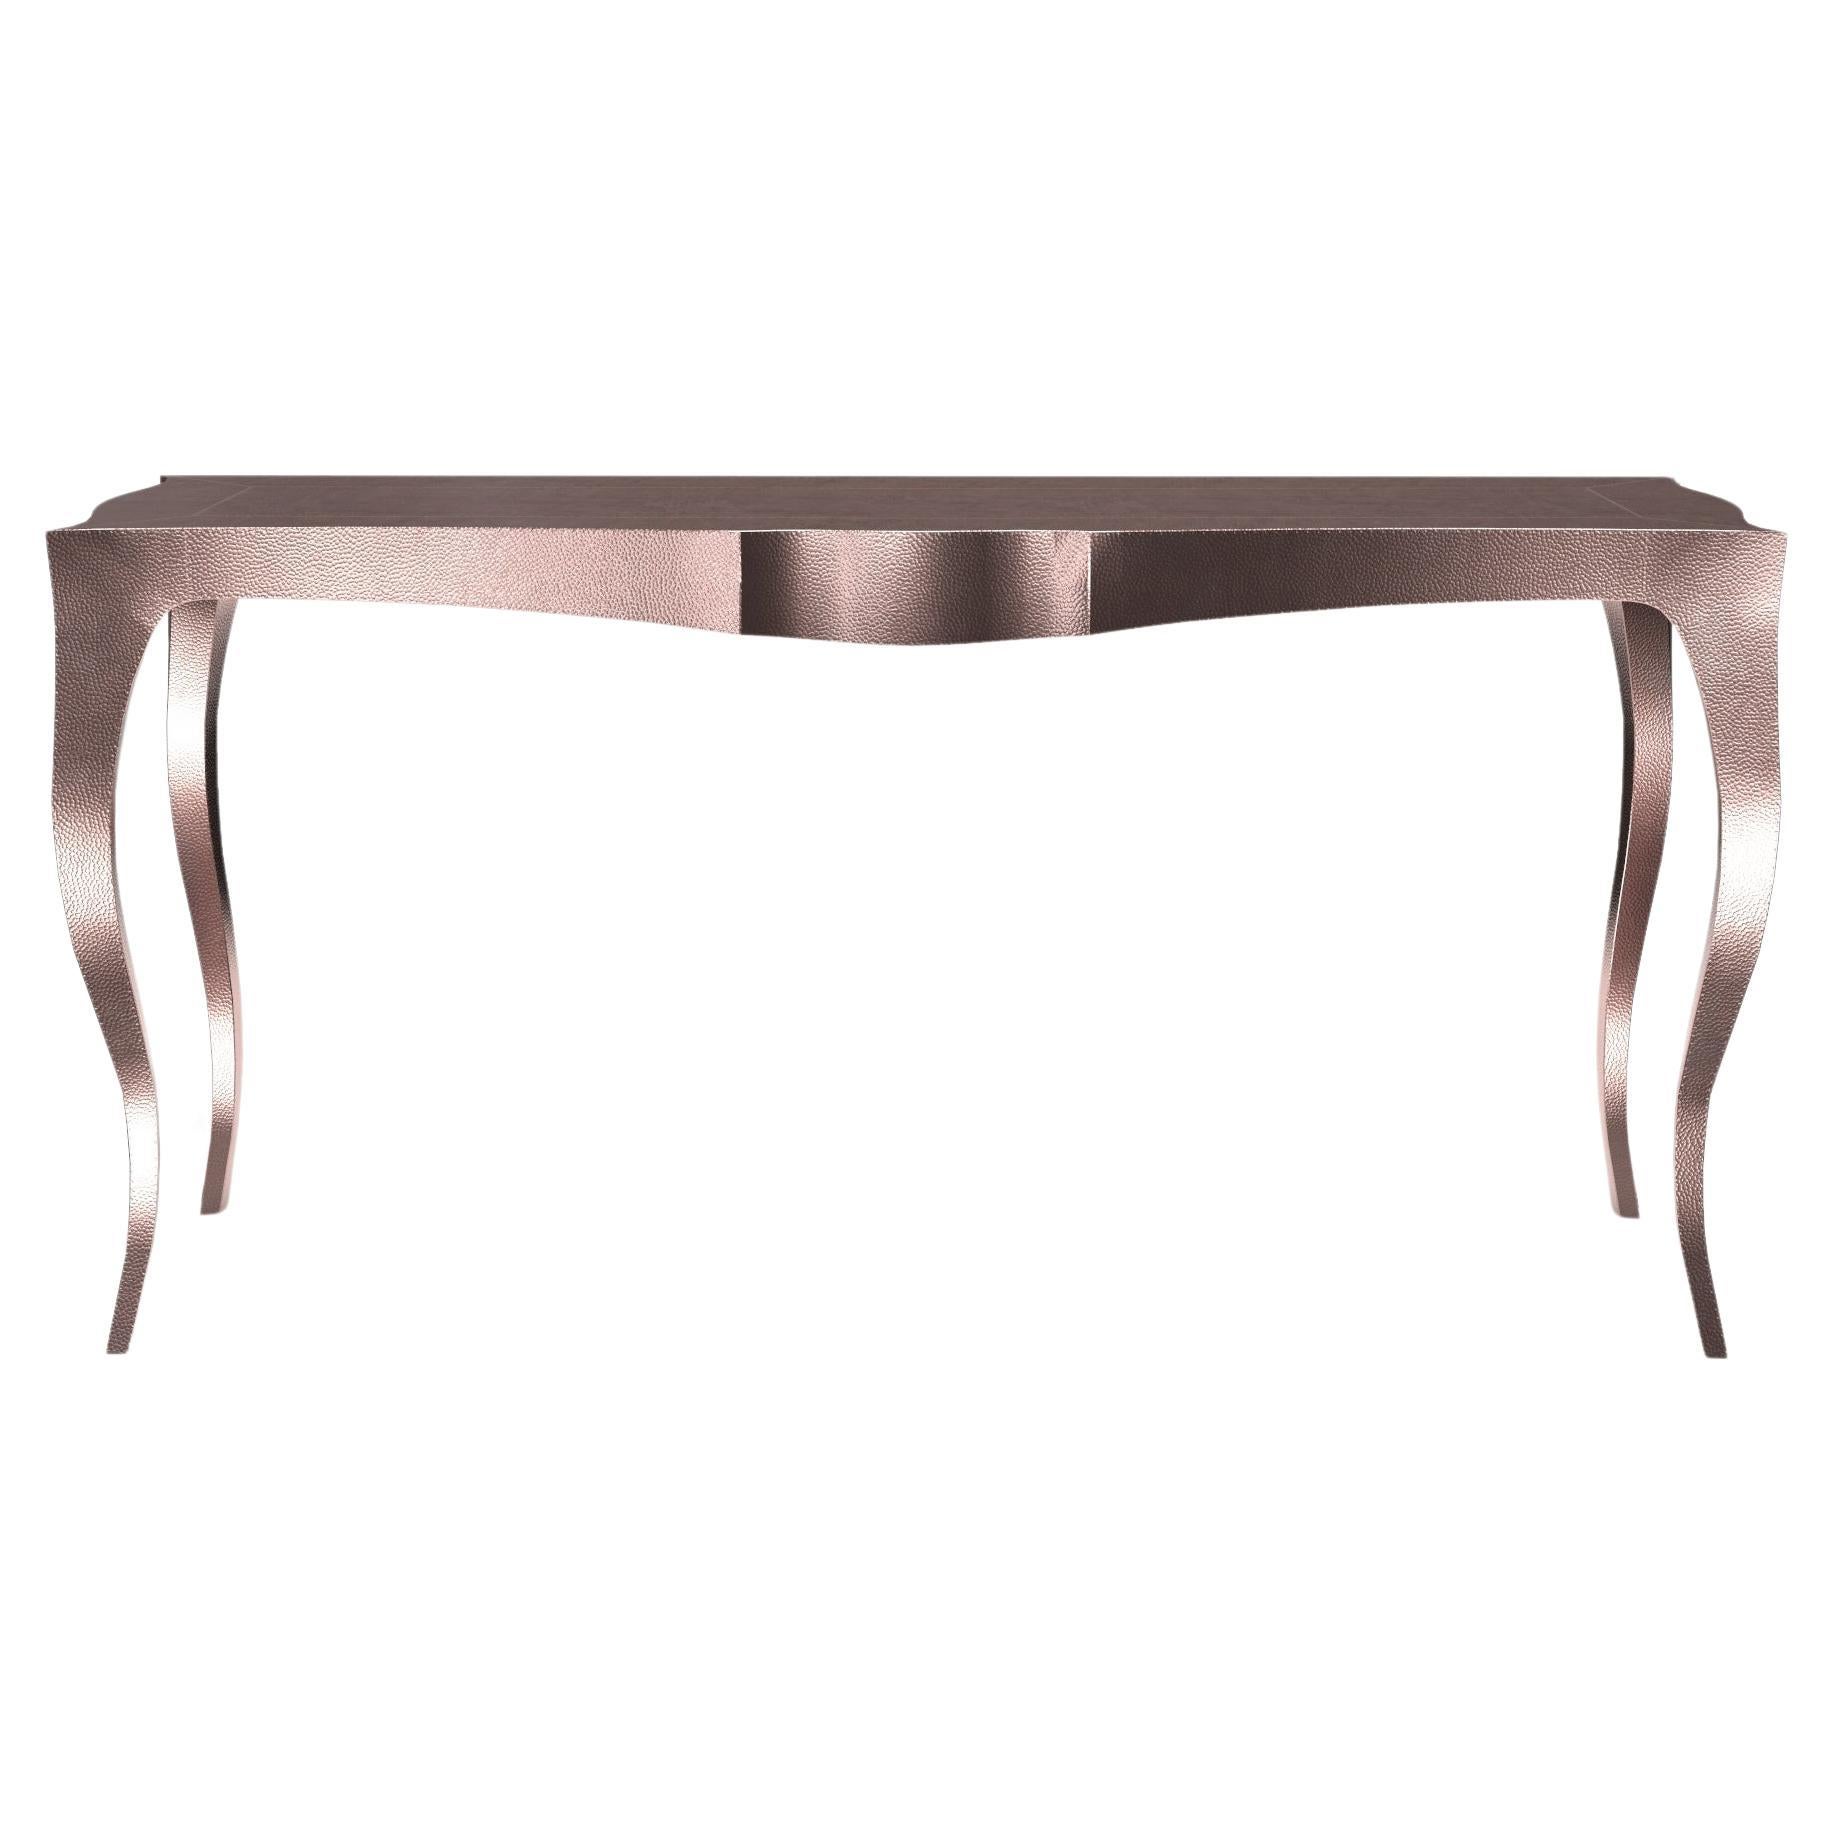 Louise Console Art Deco Nesting Tables and Stacking Tables Mid. Hammered Copper 